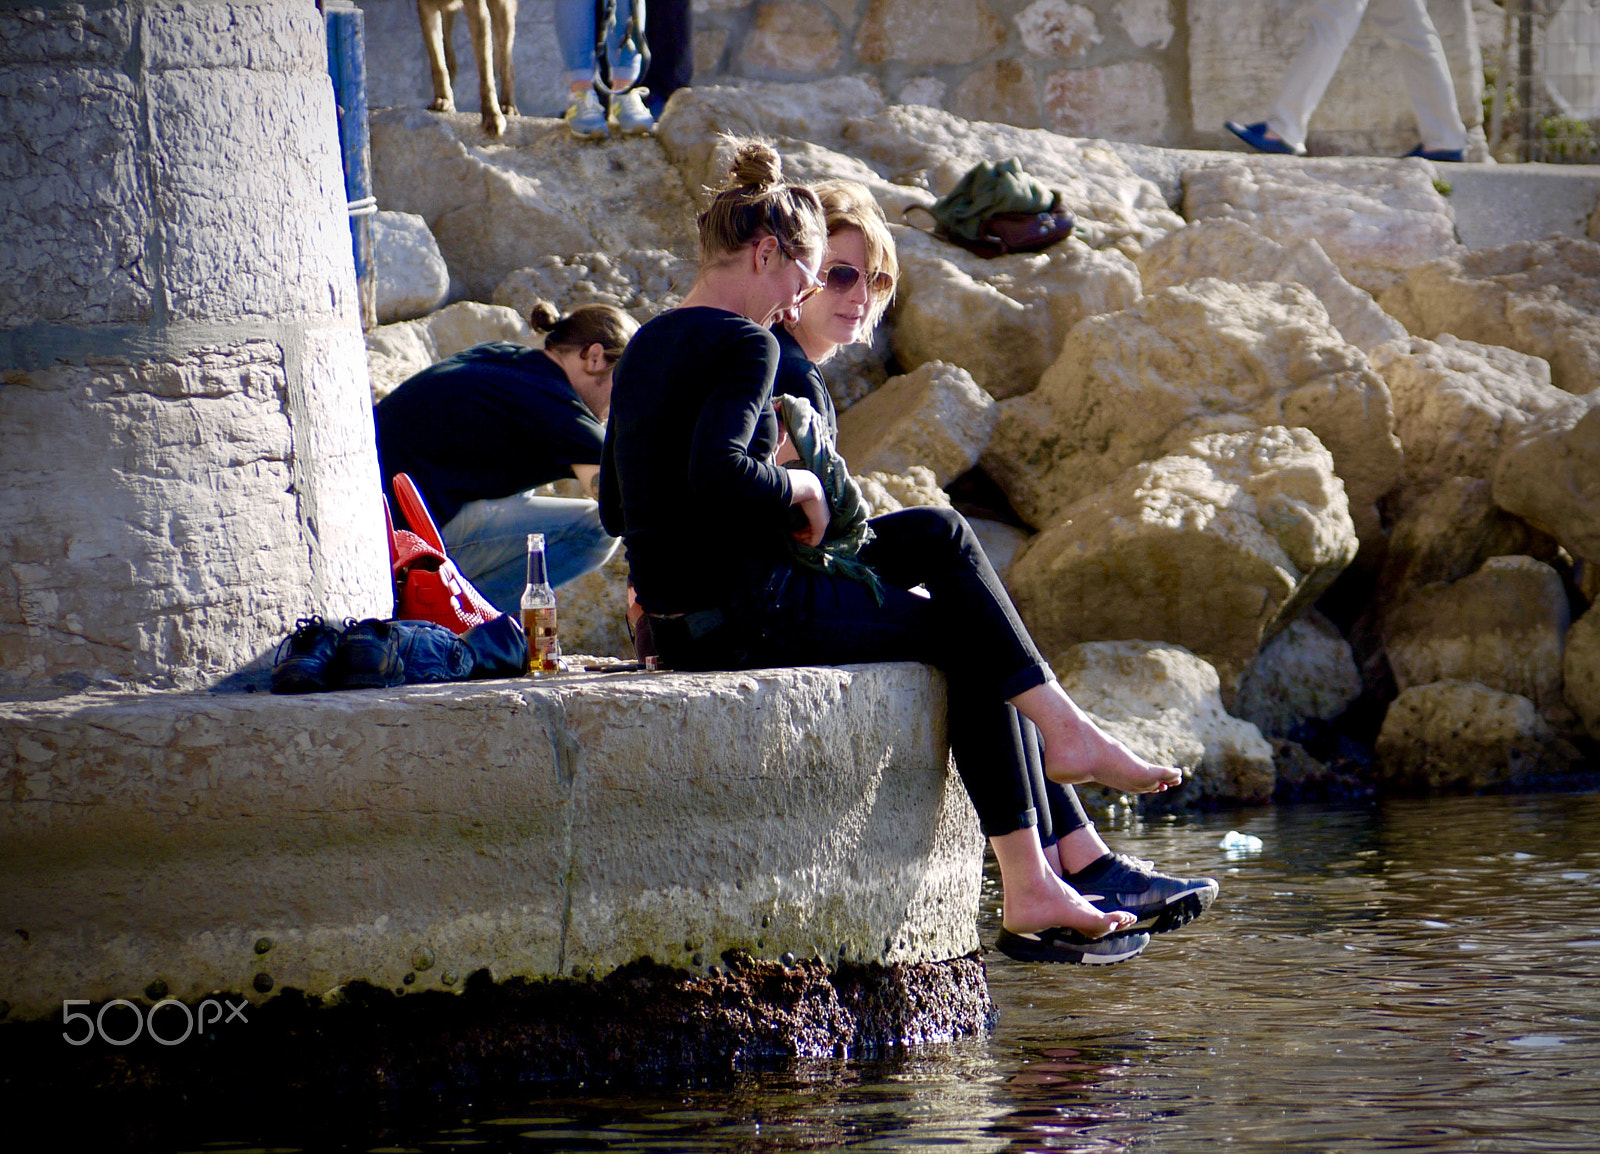 Panasonic Lumix G Vario 45-200mm F4-5.6 OIS sample photo. End of day relaxation, vallon des auffes photography